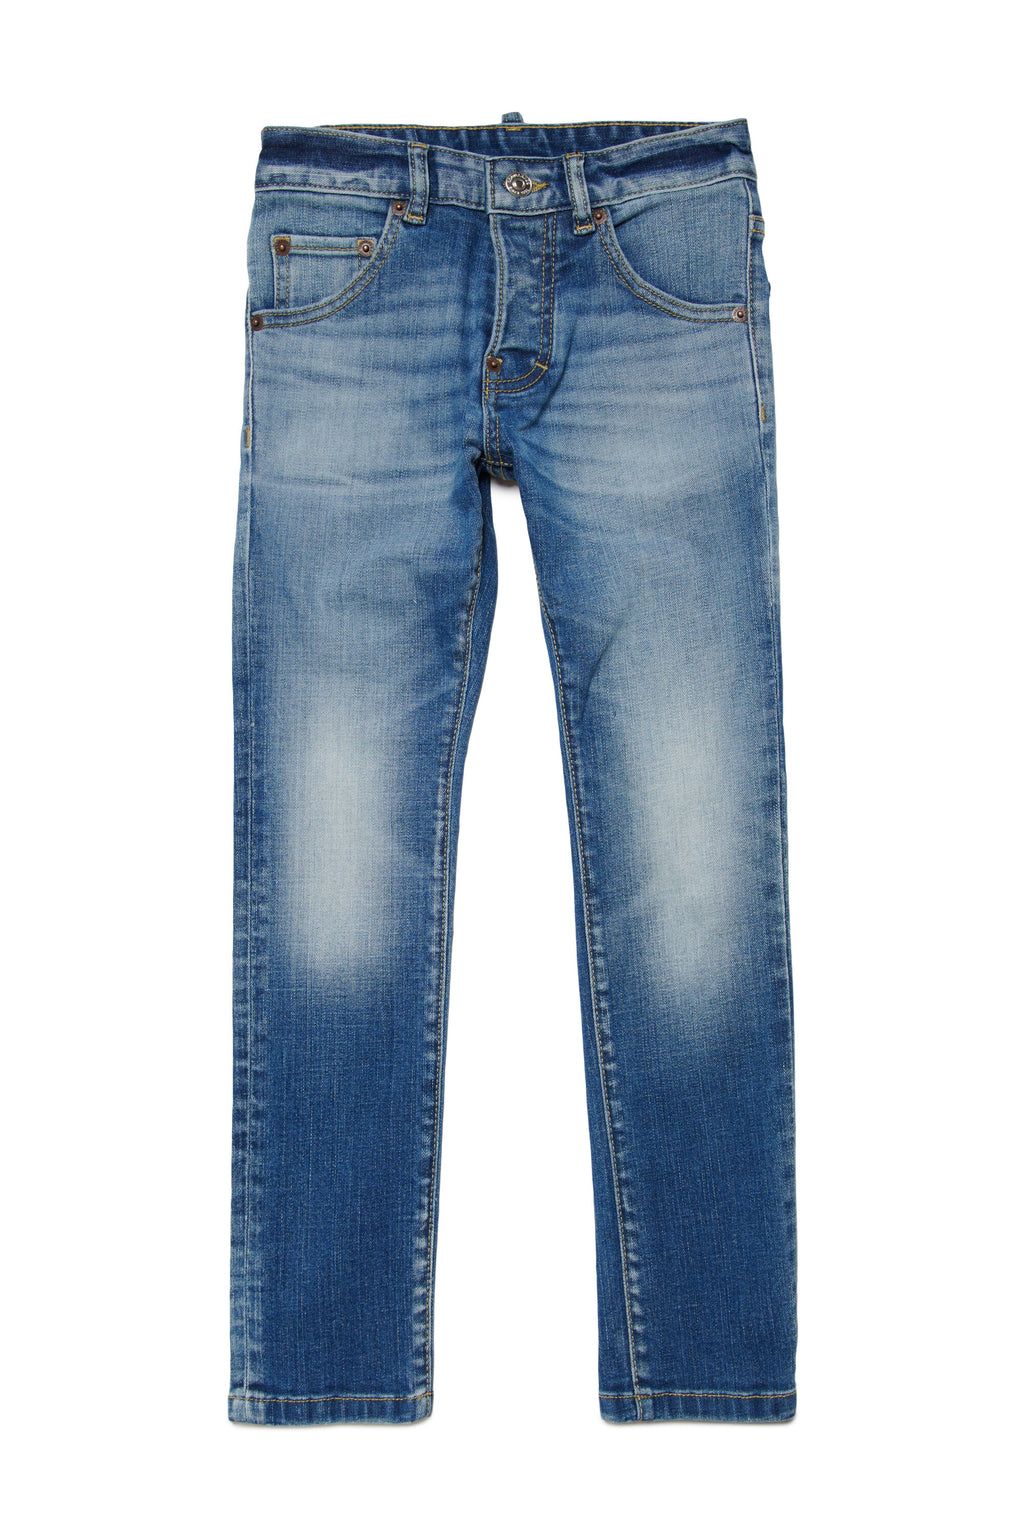 Shaded blue skinny jeans - Cool Guy